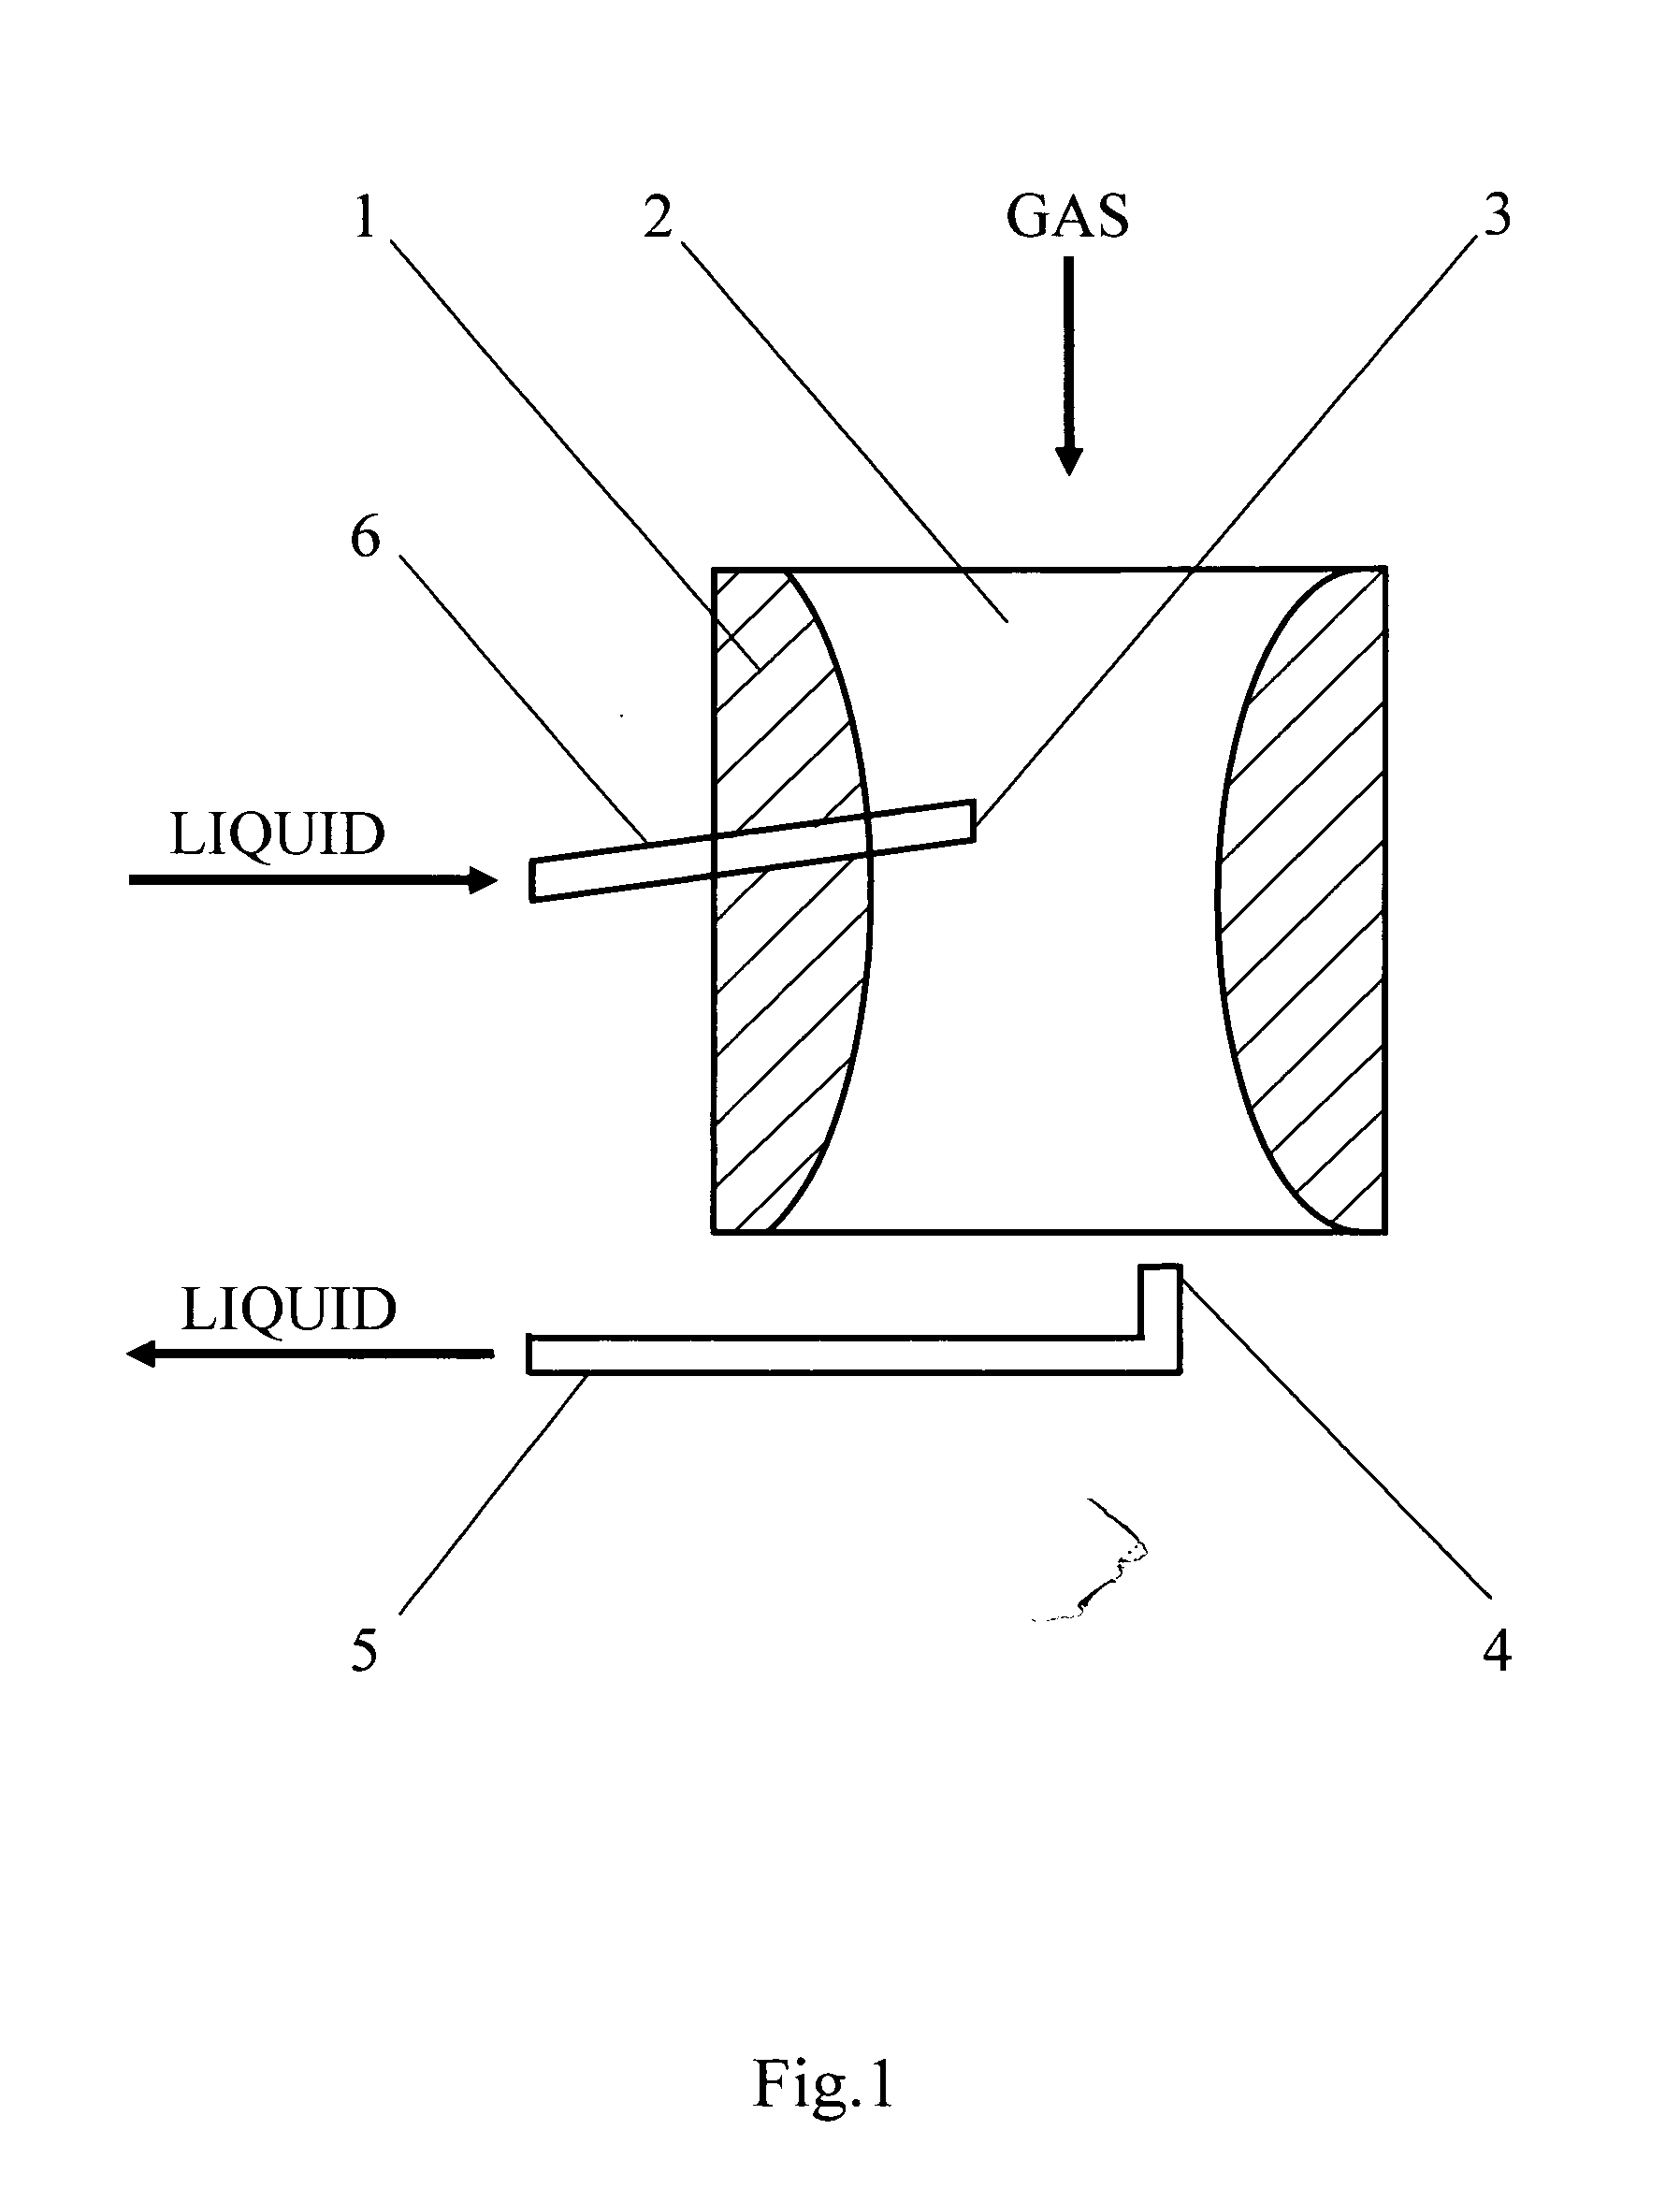 Method for selective-regulating spraying liquid and a device for carrying out said method